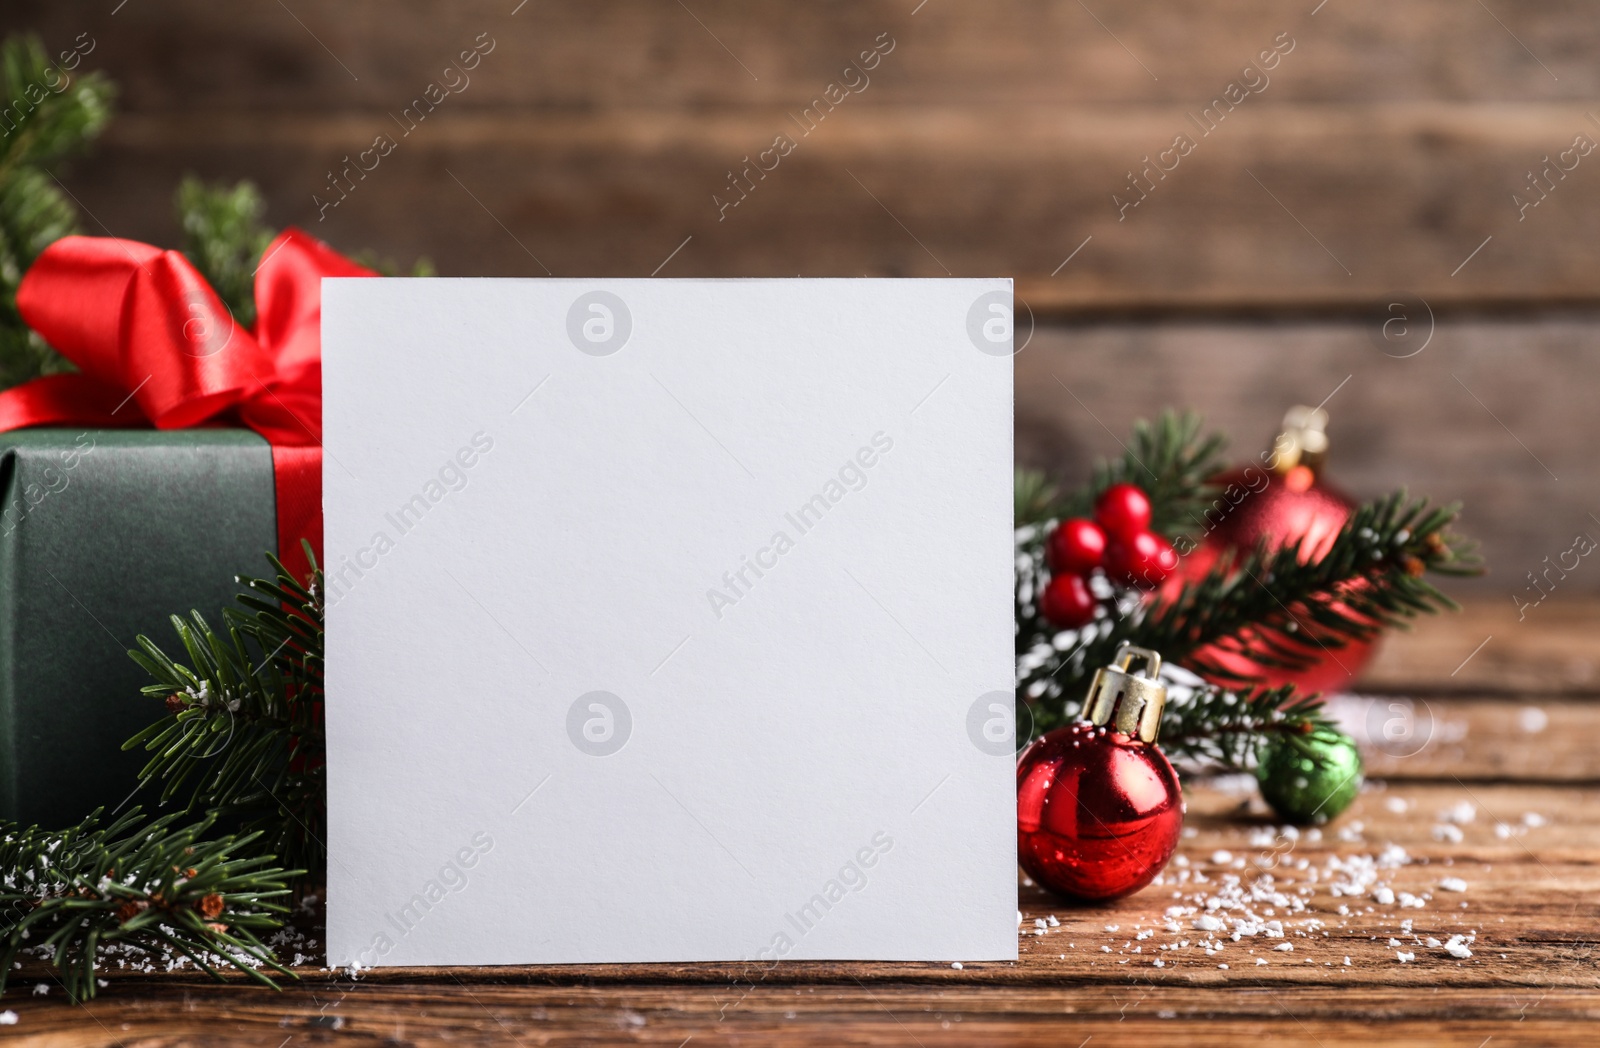 Photo of Blank Christmas card and festive decor on wooden table, closeup. Space for text